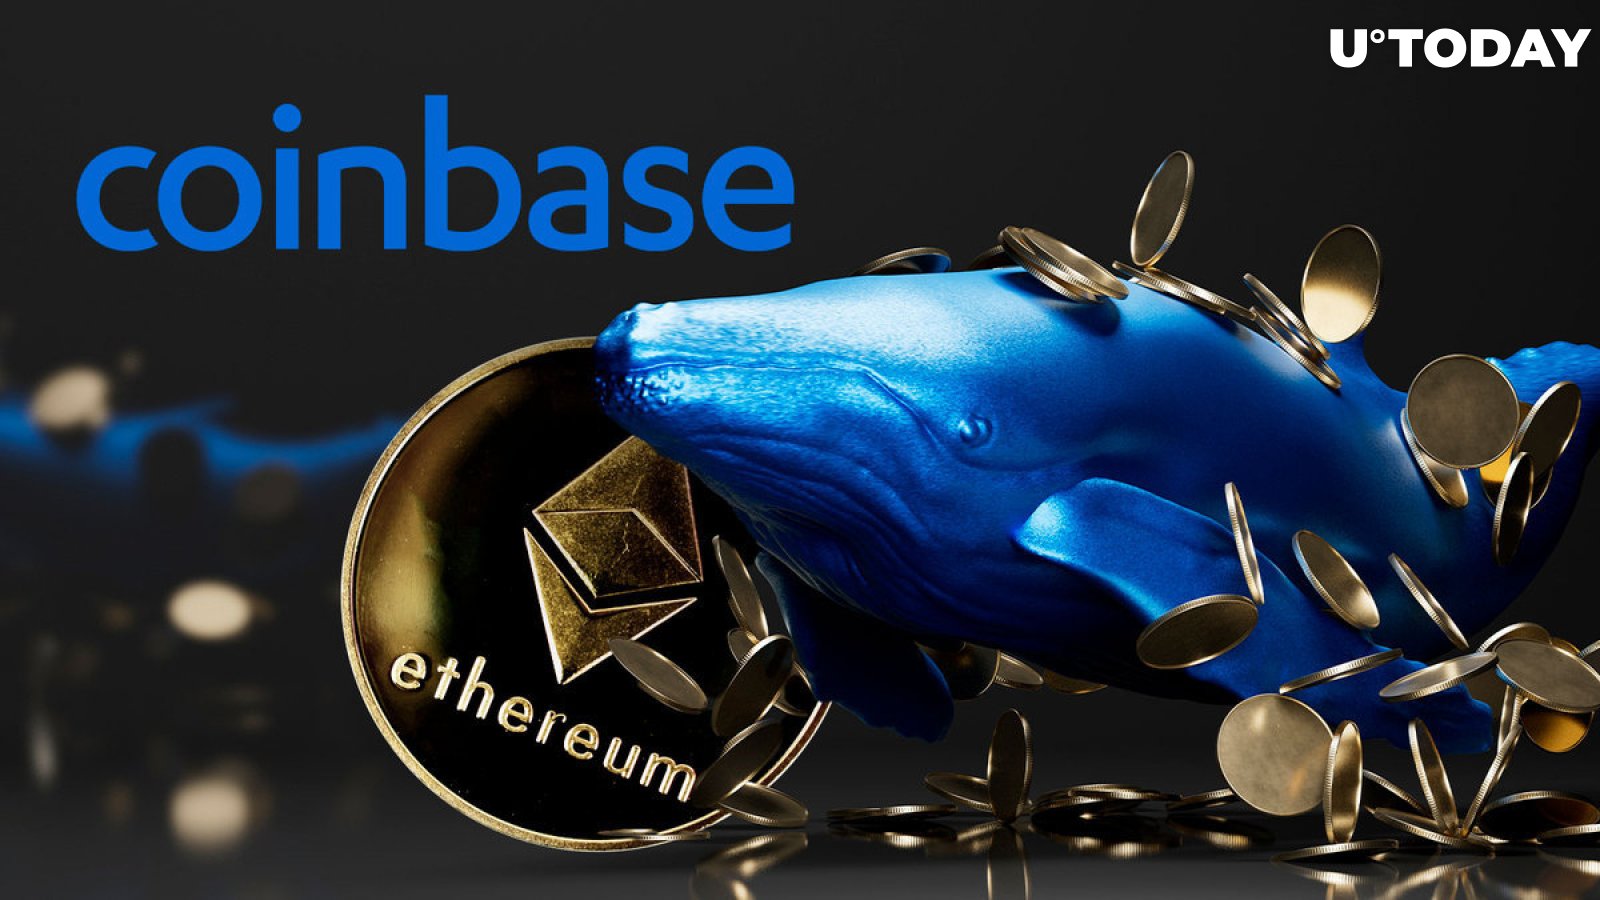 Ancient Whale Sends Millions in ETH to Coinbase: Liquidation Coming?